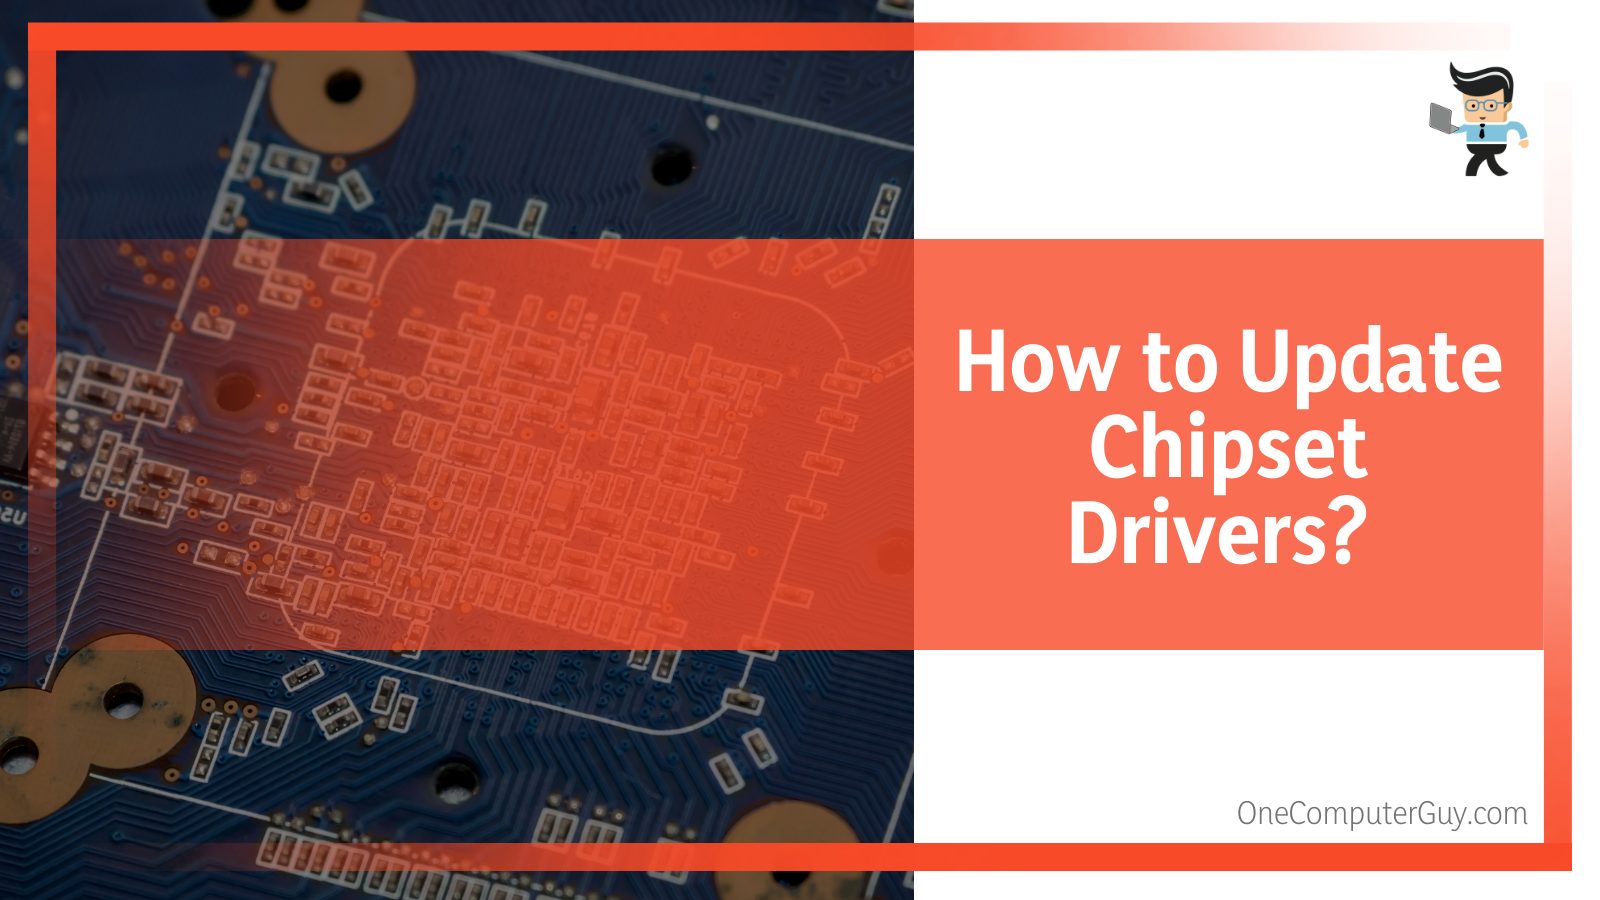 How to Update Chipset Drivers